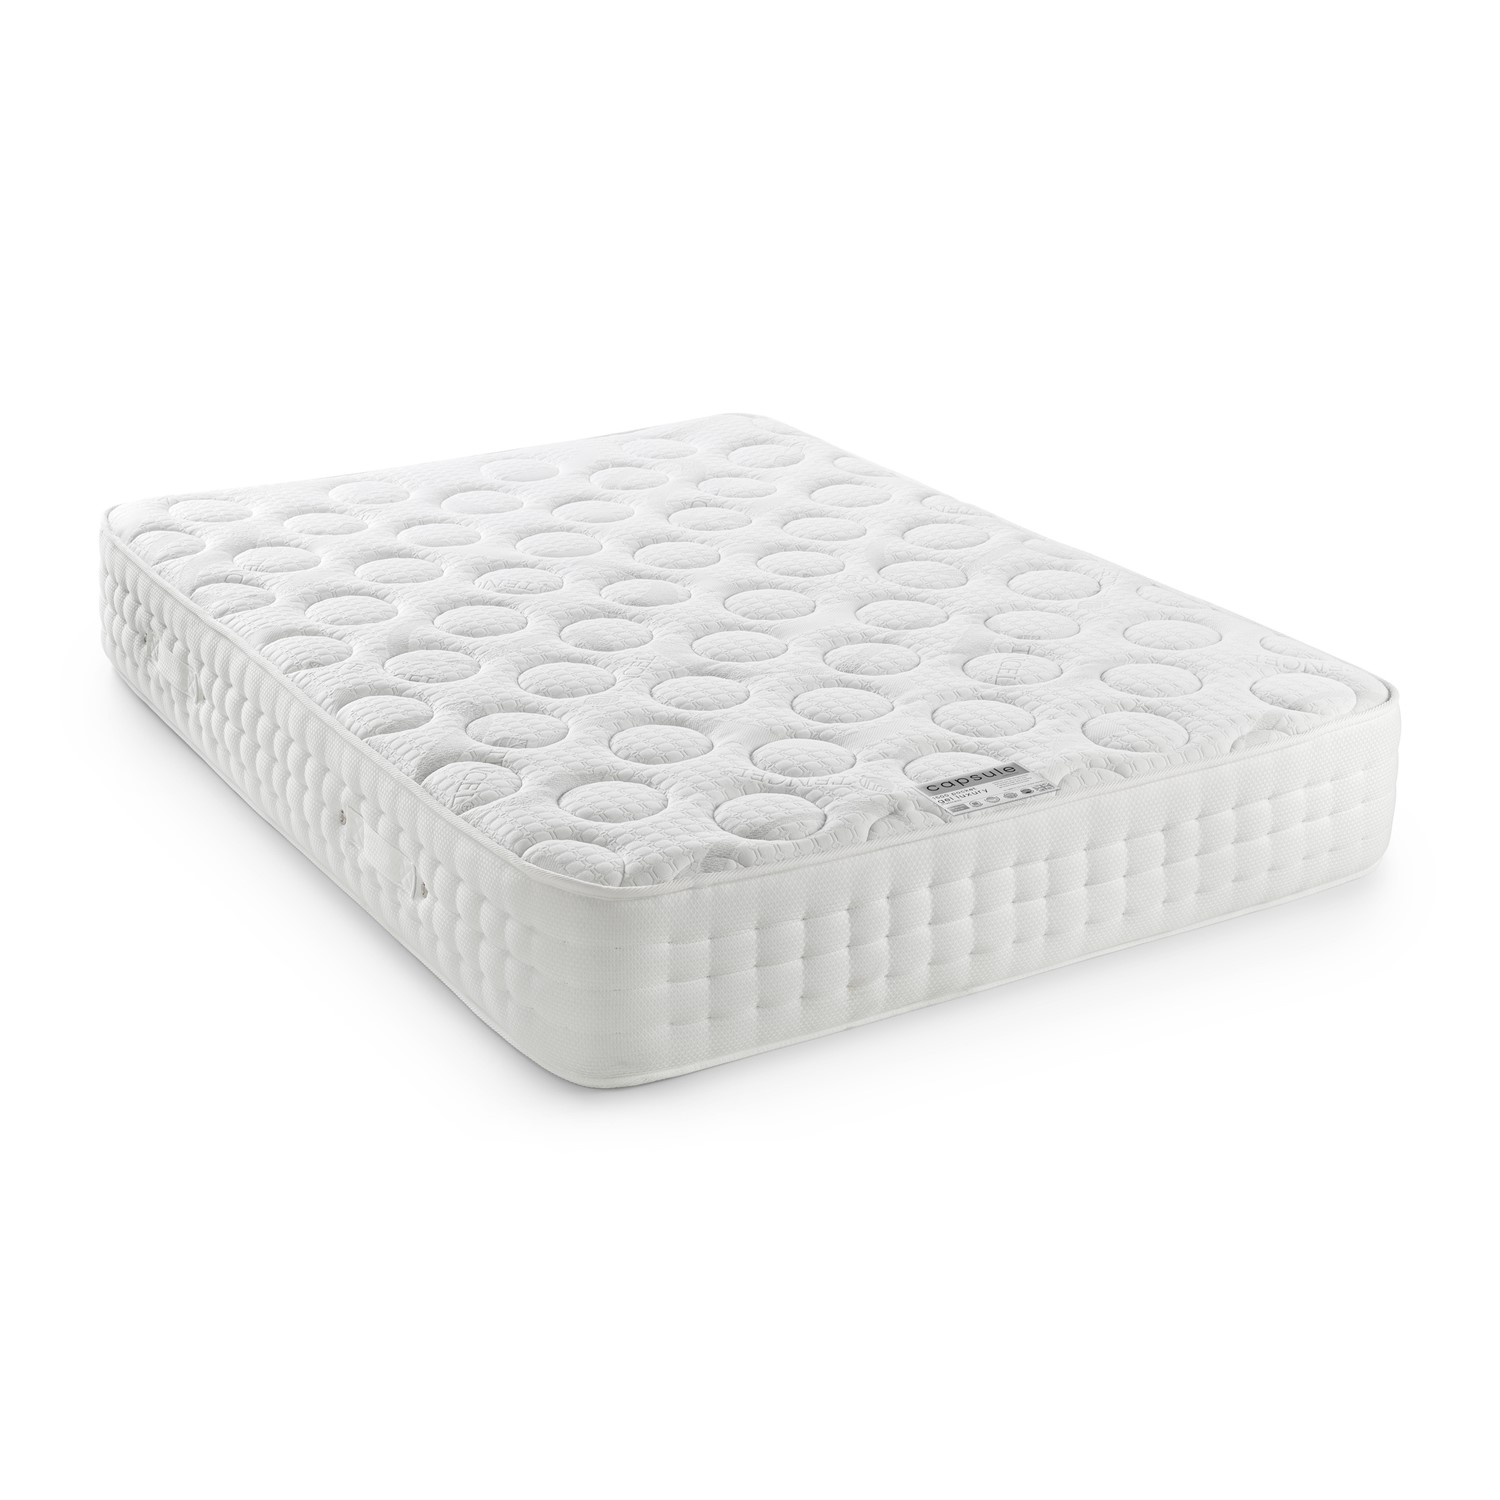 Read more about Double 1500 pocket sprung and gel hybrid cooling mattress capsule julian bowen